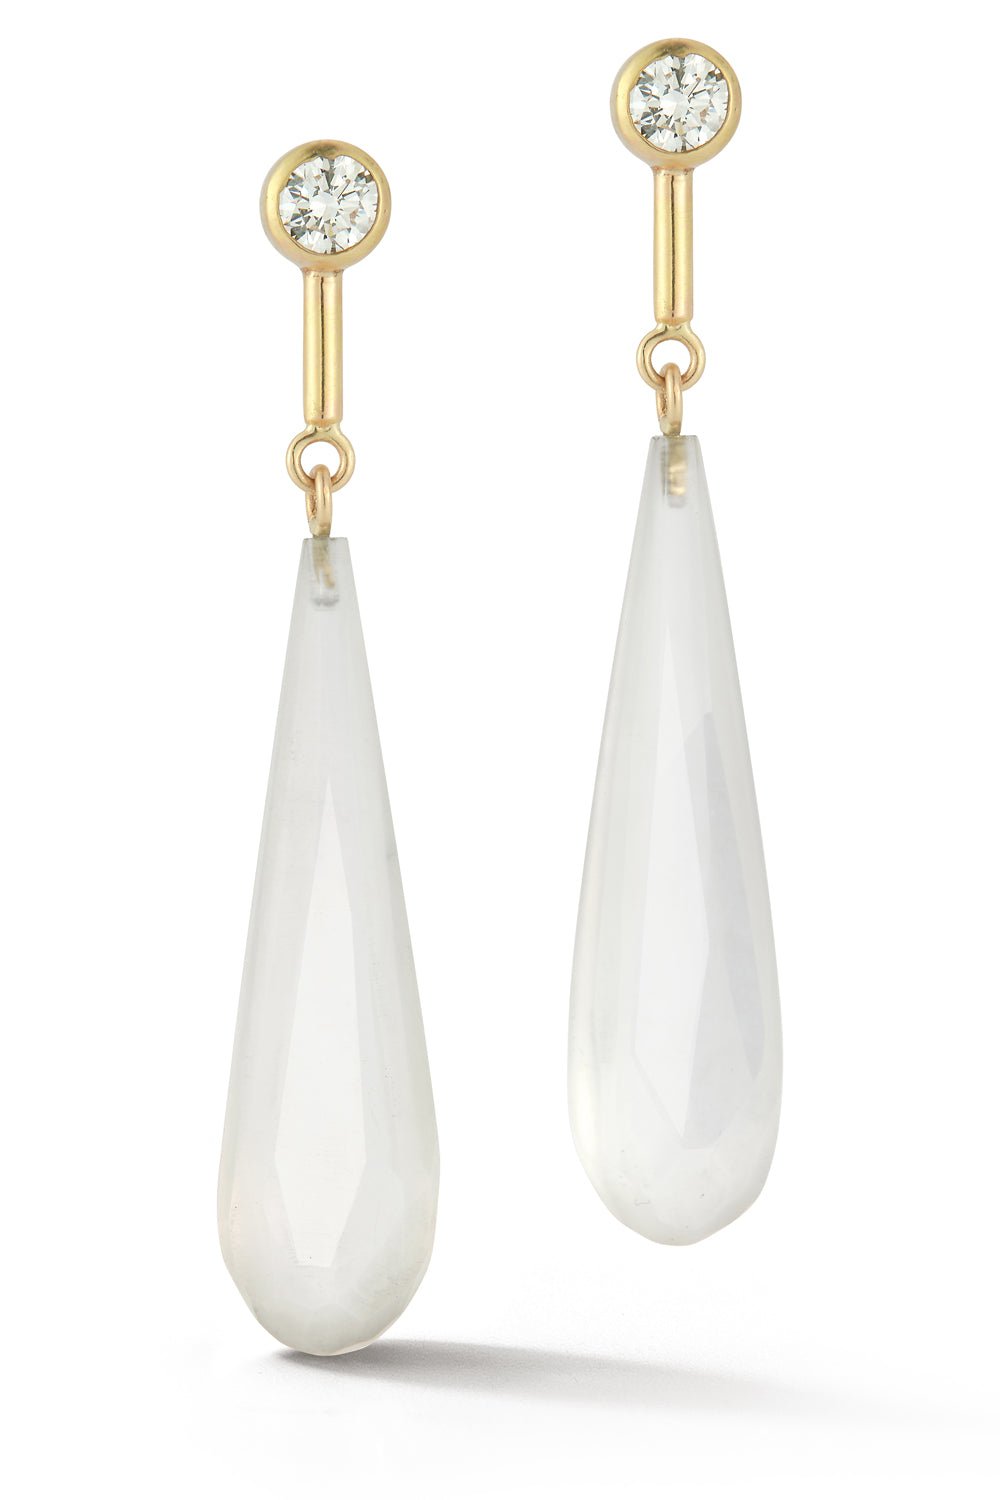 OLIVIA SHIH-Lucid Long Drop Studs-RECYCLED GOLD (WHEN POSSIBLE)